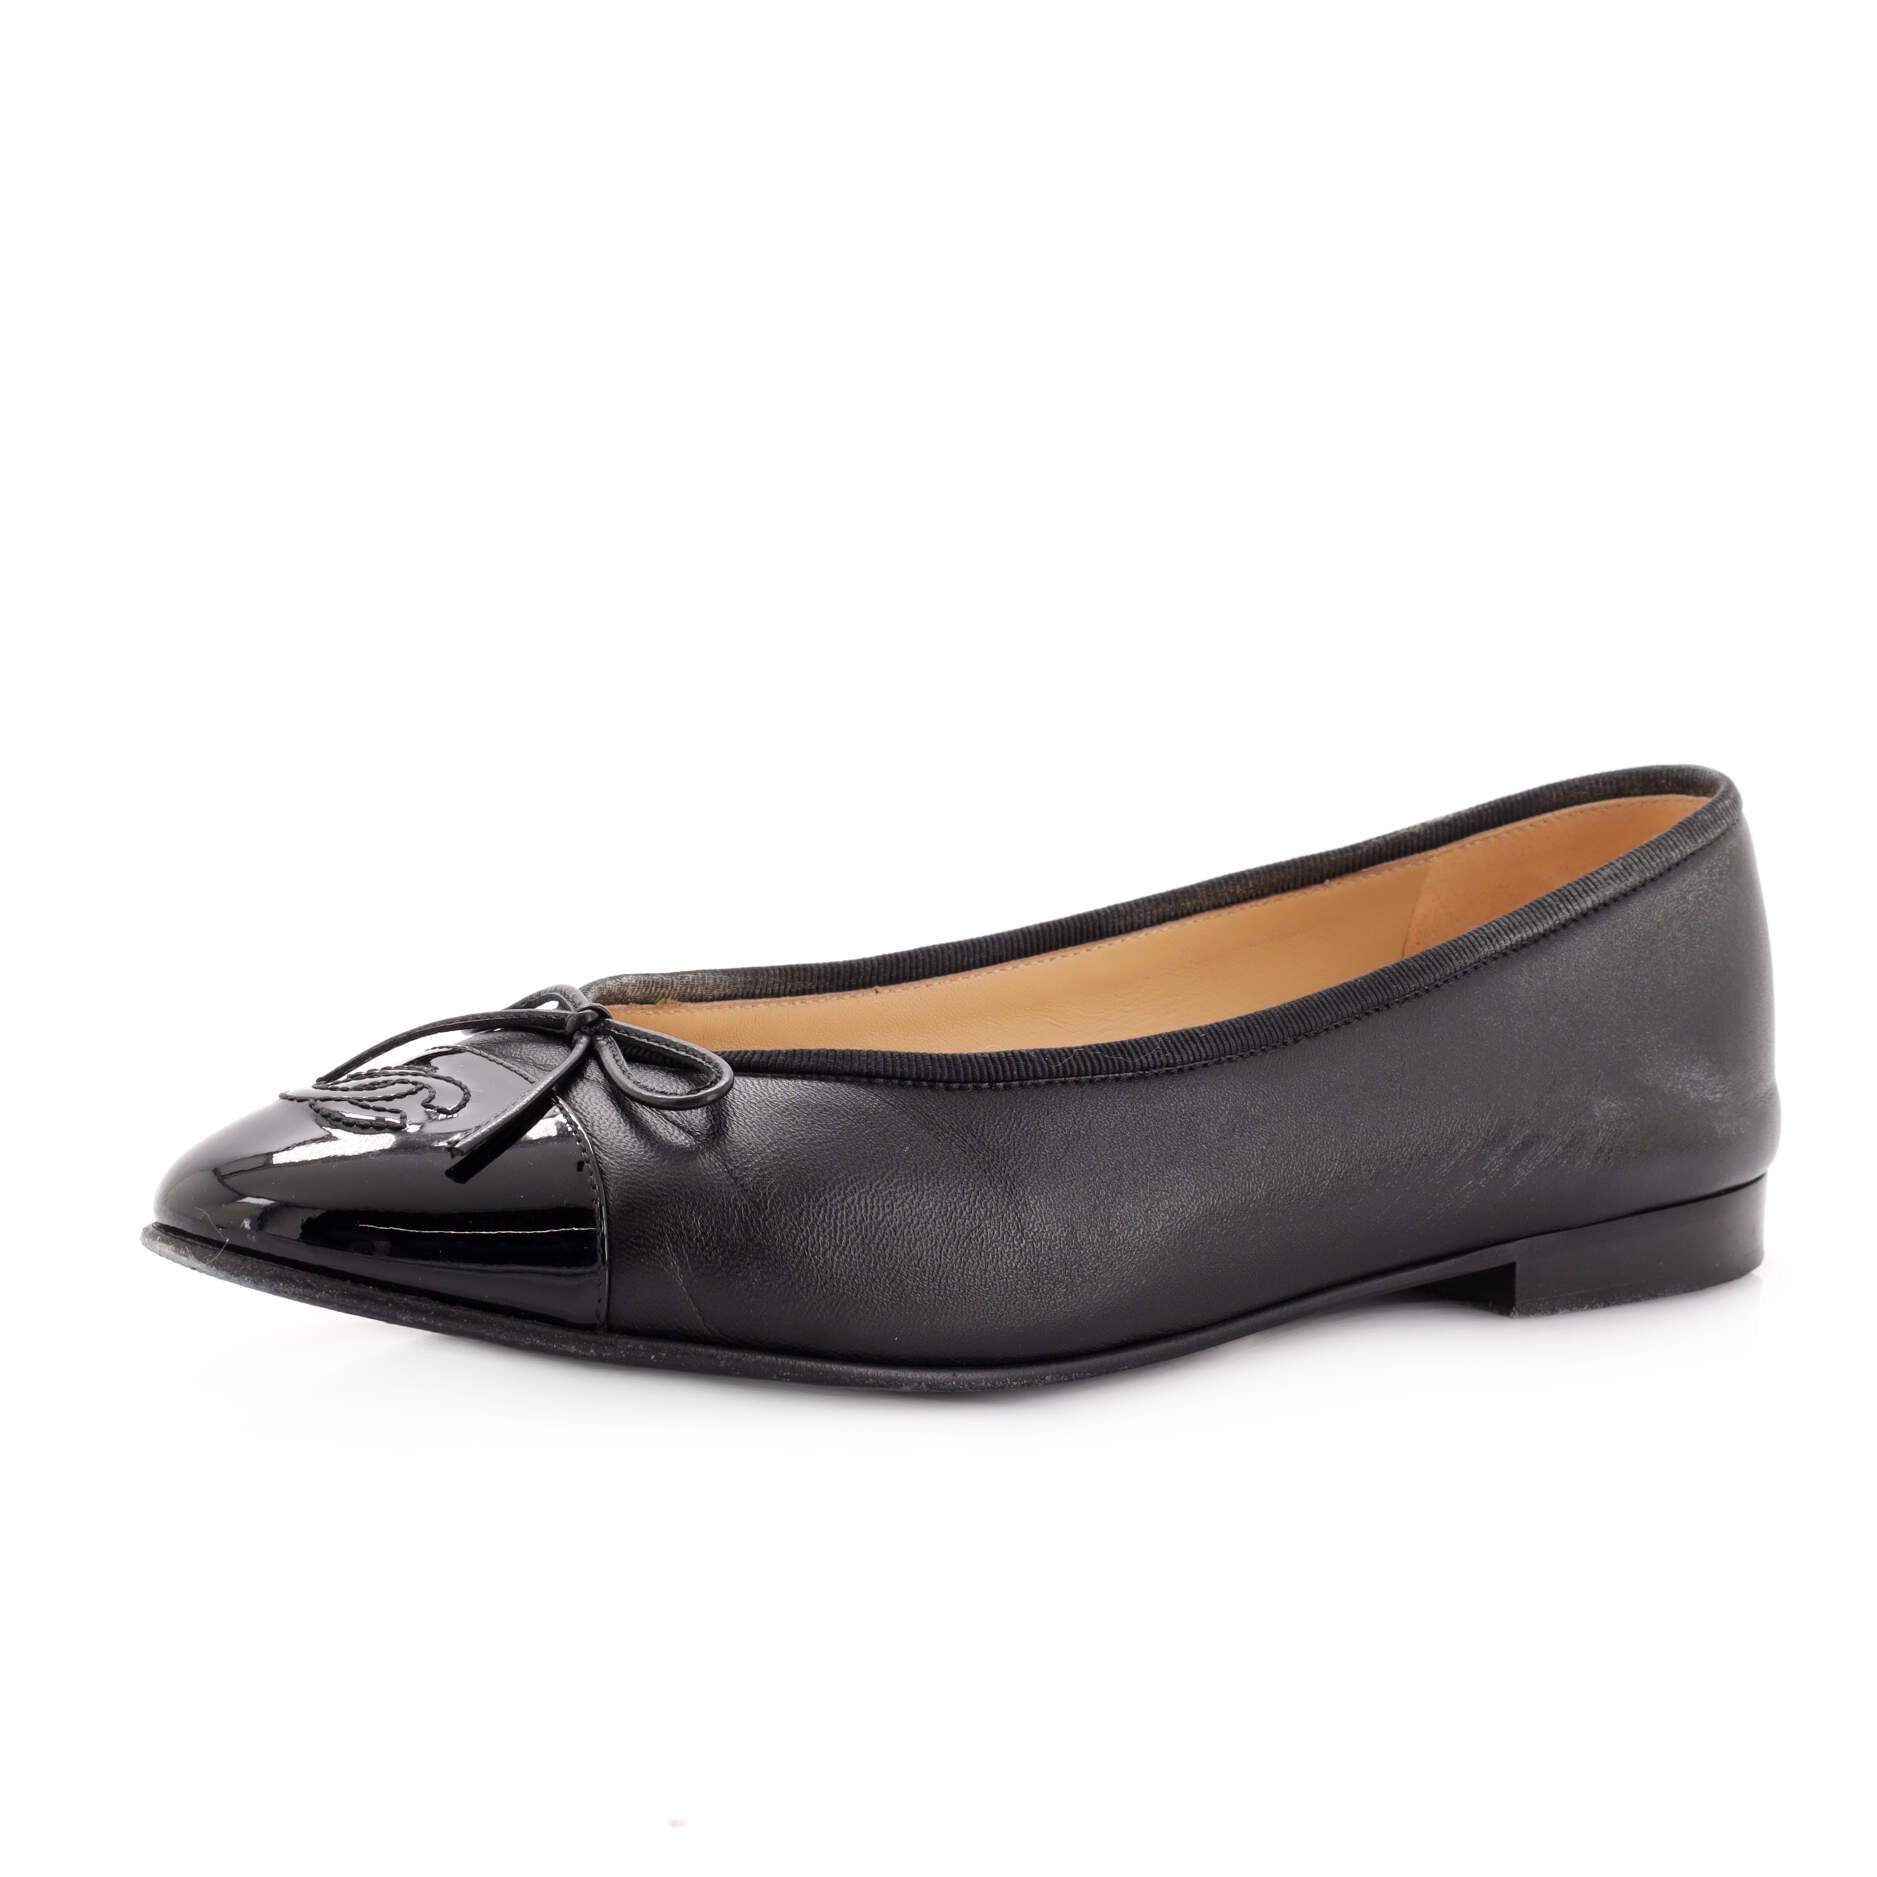 CHANEL Women's CC Cap Toe Bow Ballerina Flats Leather and Patent